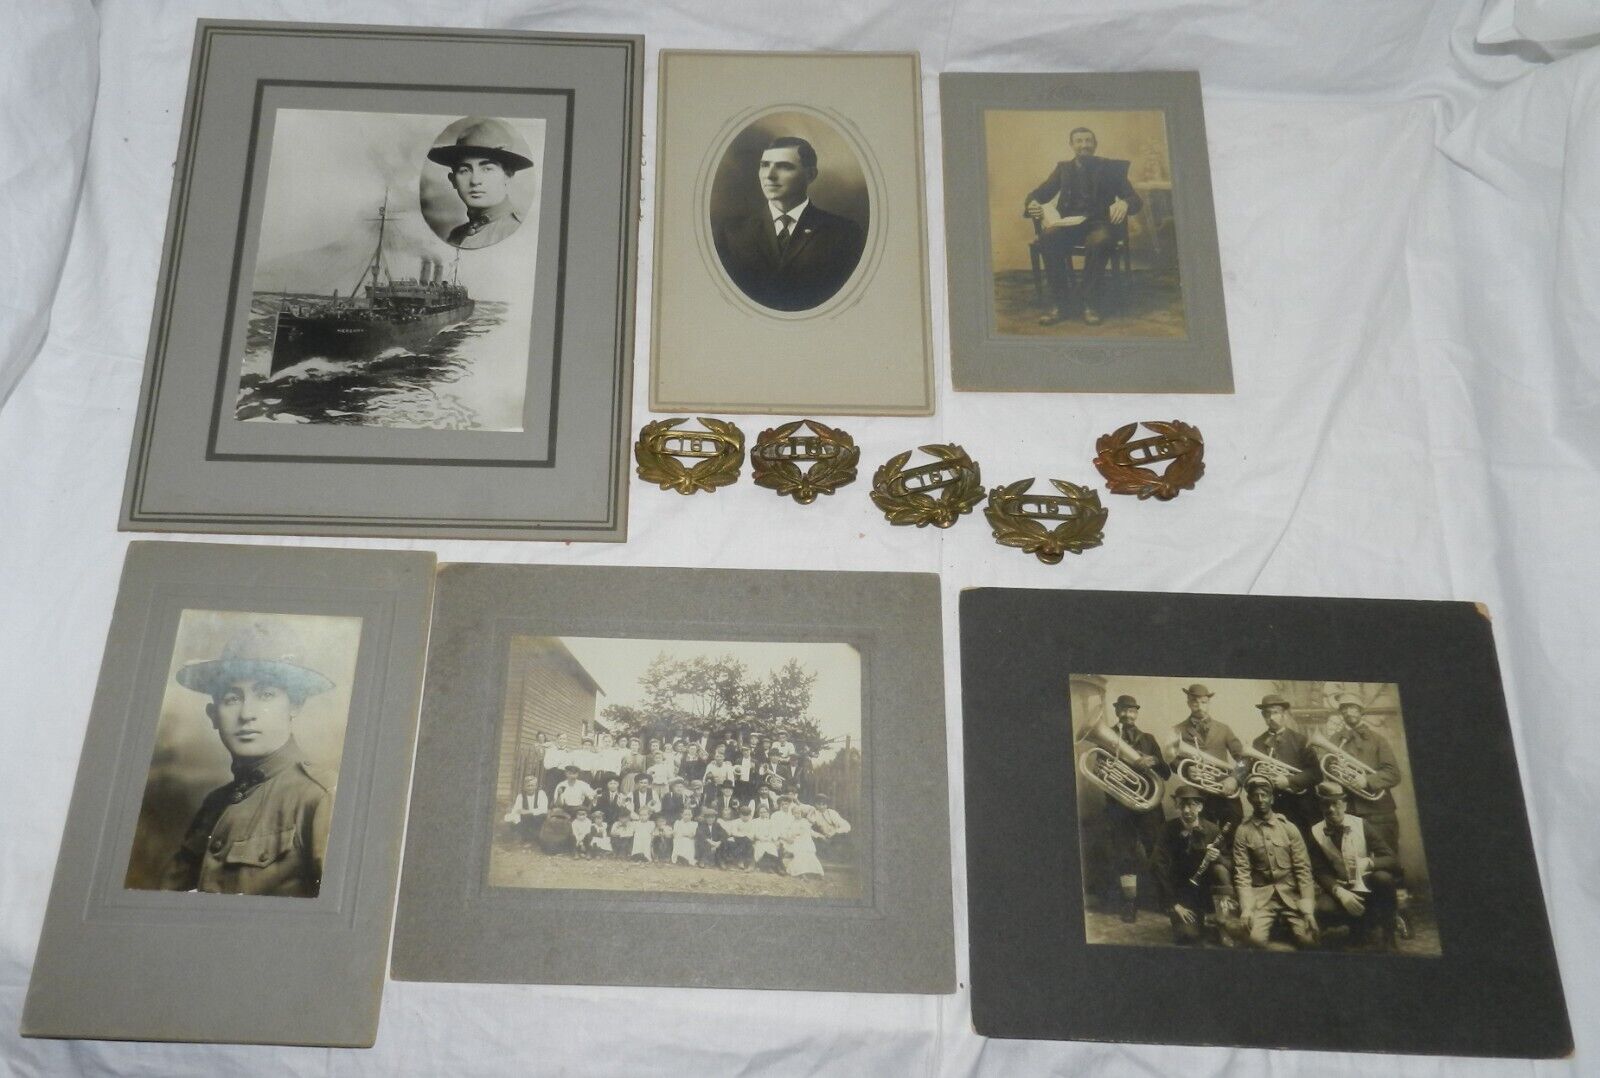 Lot of 6 Cabinet Cards - some Military related + 6 Band Regiment Hat Badges